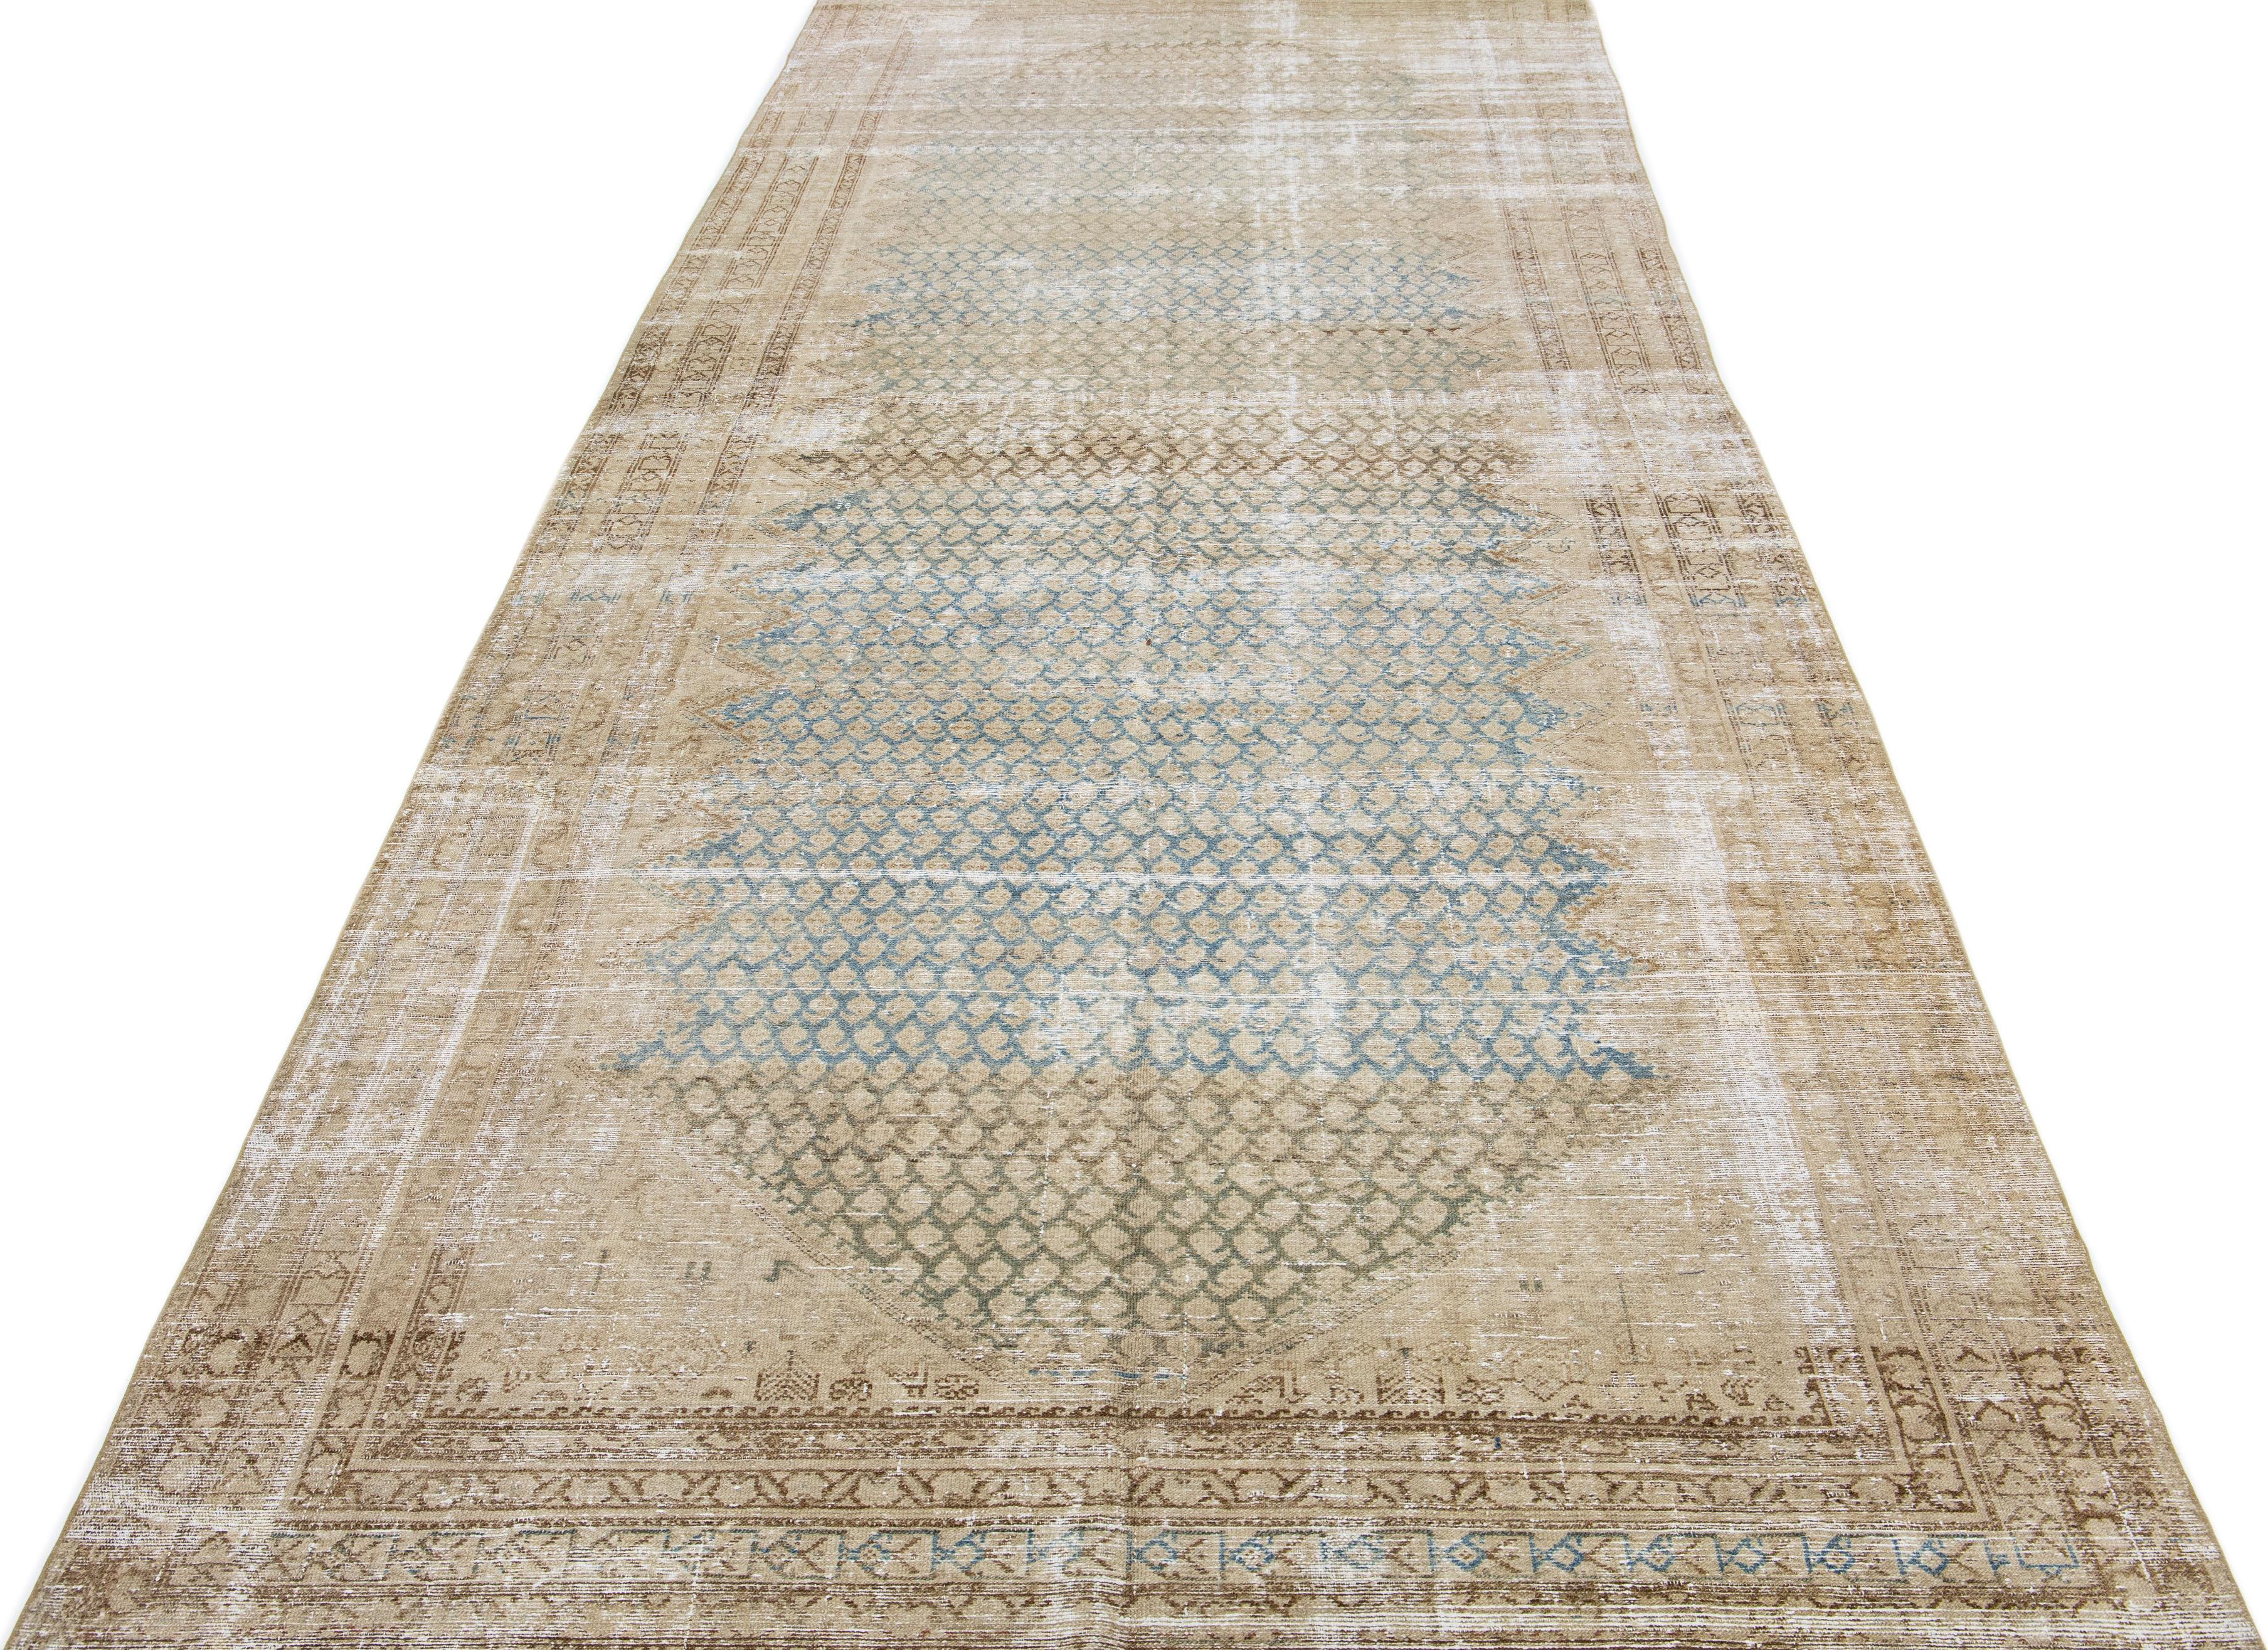 Beautiful antique Malayer hand-knotted wool runner with a beige color field. This Persian piece has blue and brown accents in an all-over geometric pattern. 

This rug measures: 6'3